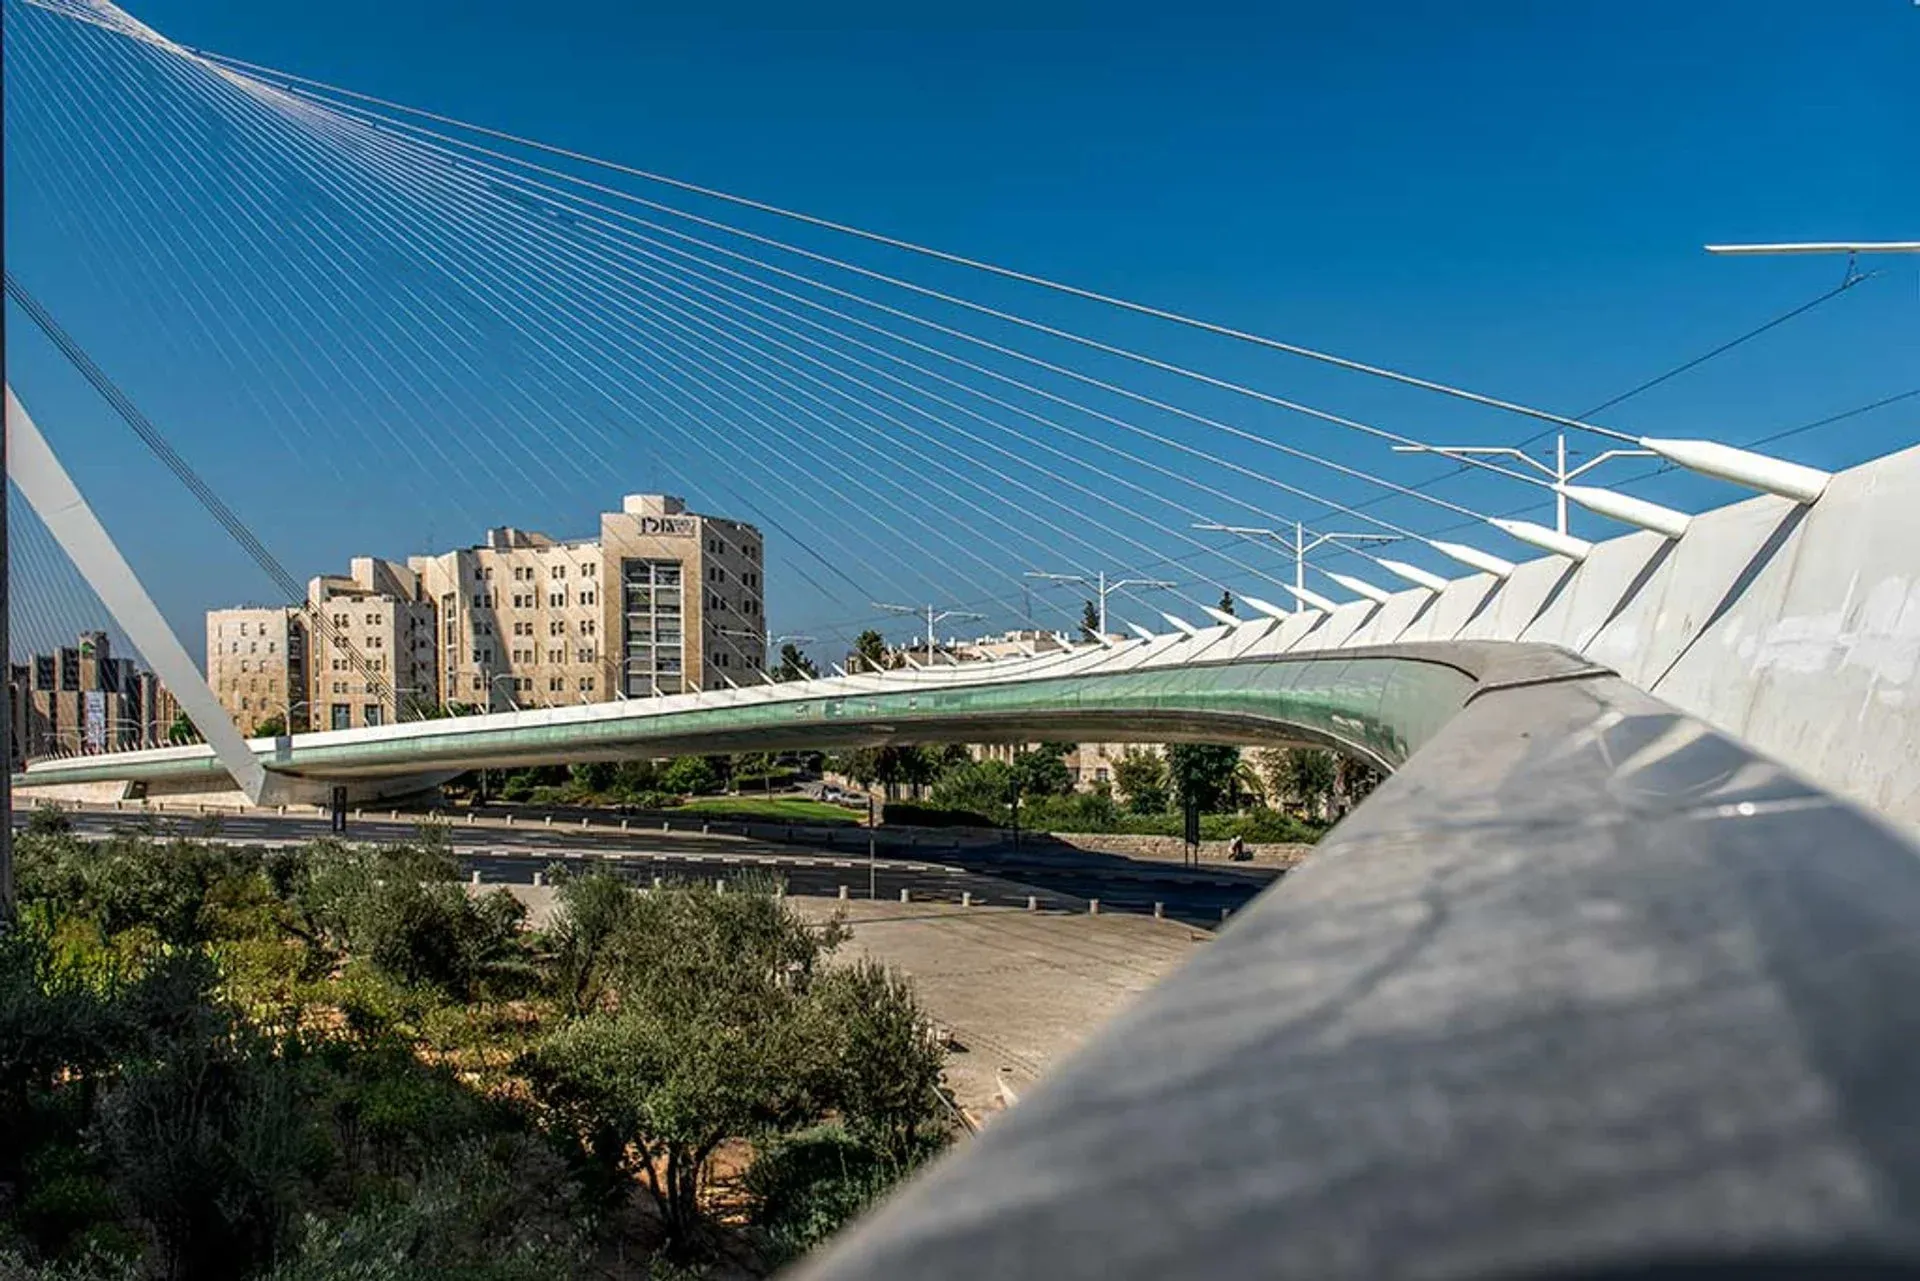 Chords Bridge in Israel, Middle East | Architecture - Rated 3.6